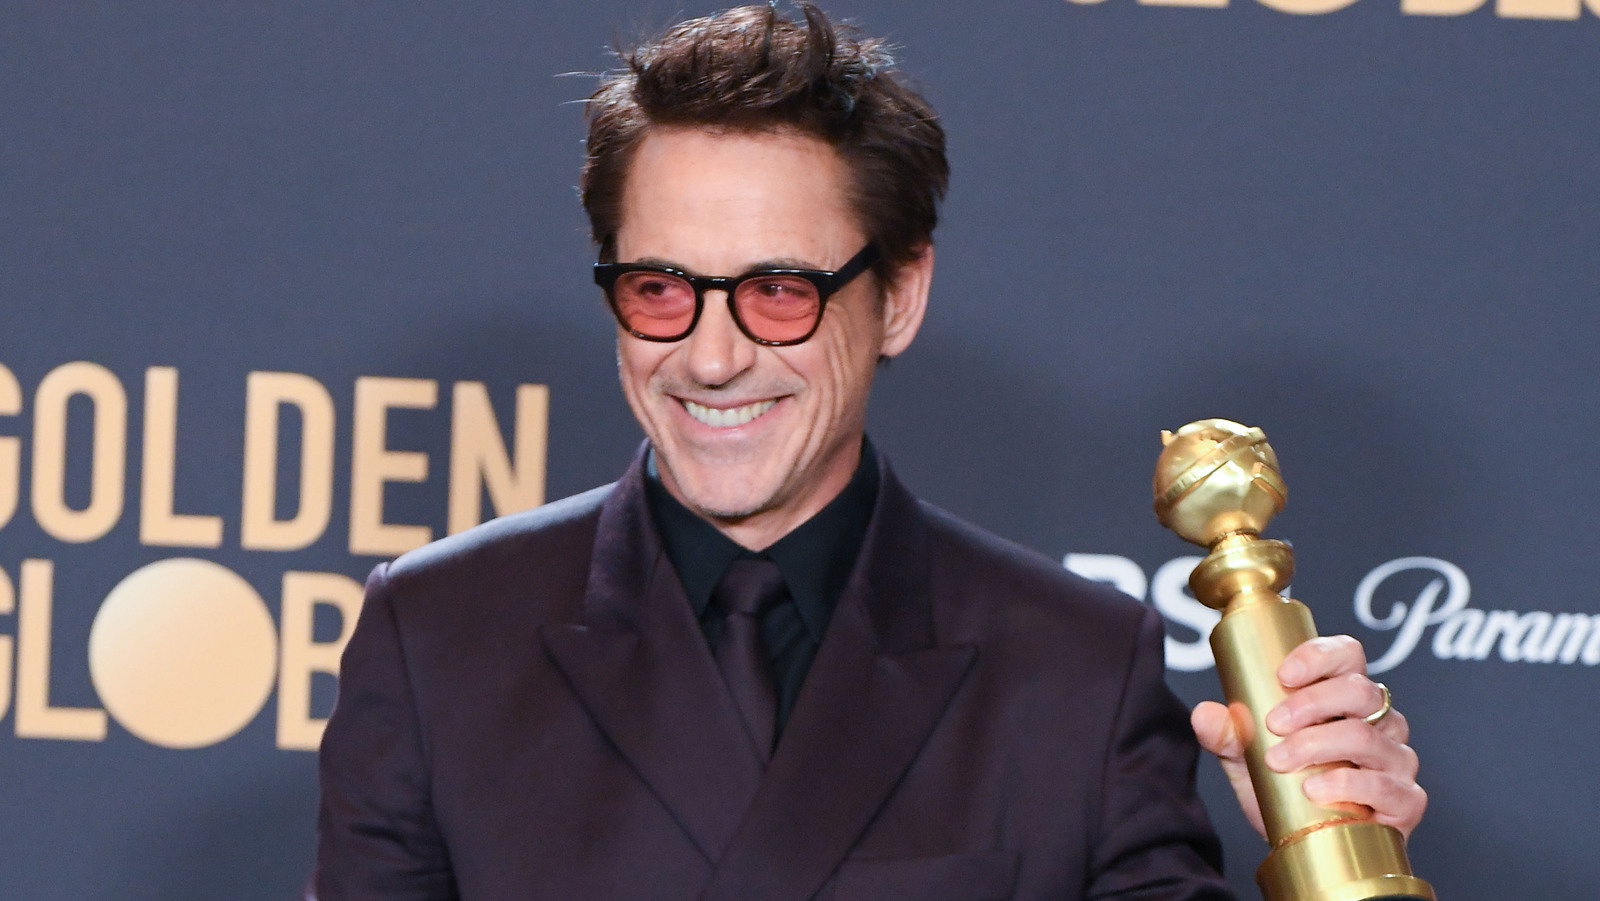 Robert Downey Jr. Said He Was On Beta Blockers During Golden Globes Speech. Here's What They Are - Health Digest